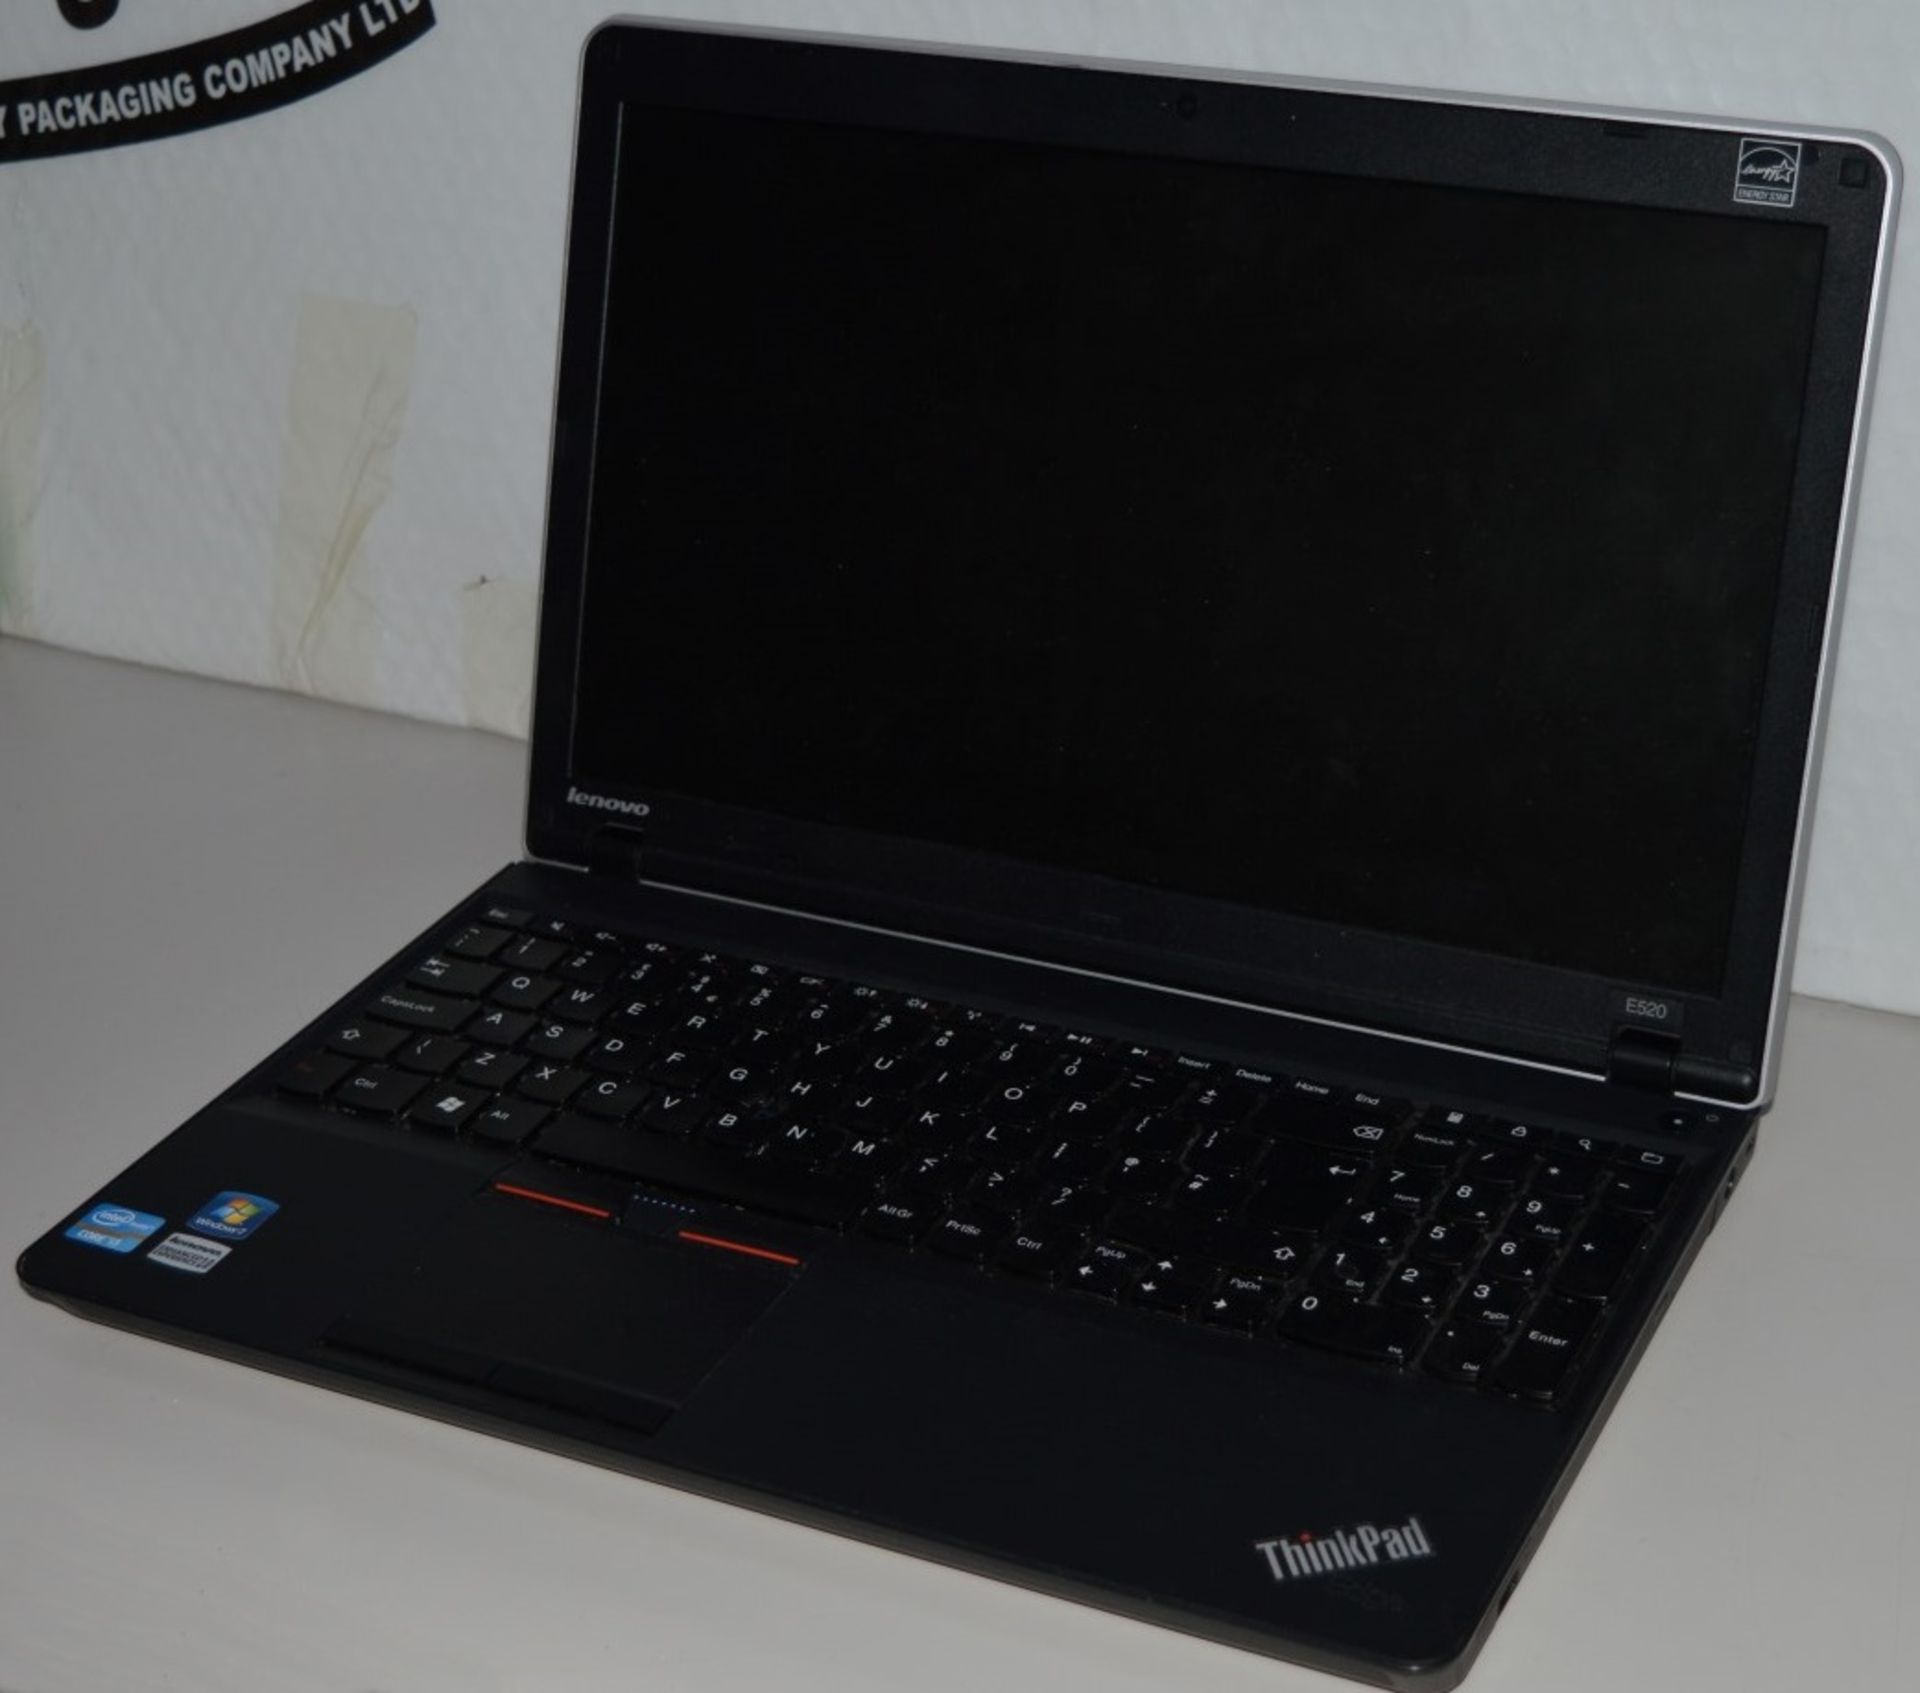 1 x Lenovo Thinkpad Laptop Computer With Intel Core i3 Processor and 15.4 Inch Screen - CL300 - - Image 2 of 7